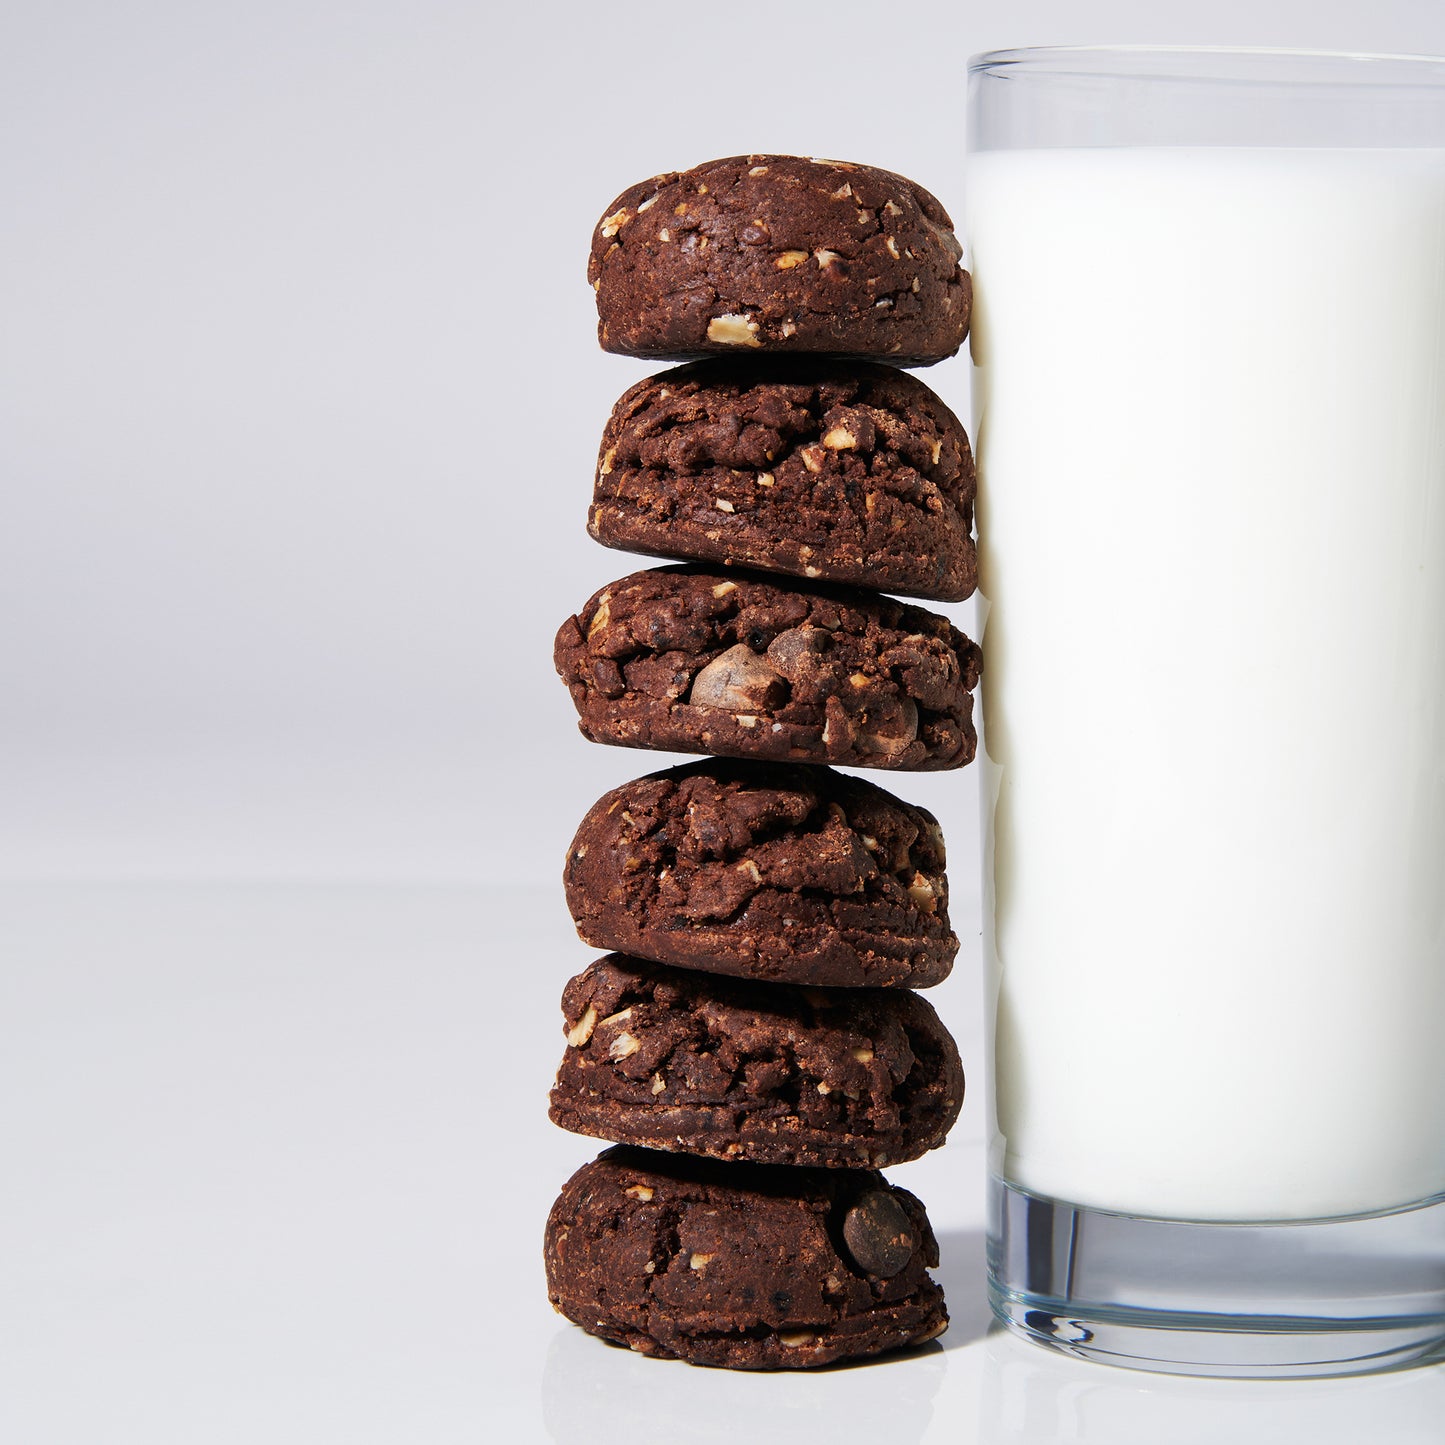 Six Mocha Oat Chocolate Chip Cookies on a white background leaning against a glass of non-dairy milk